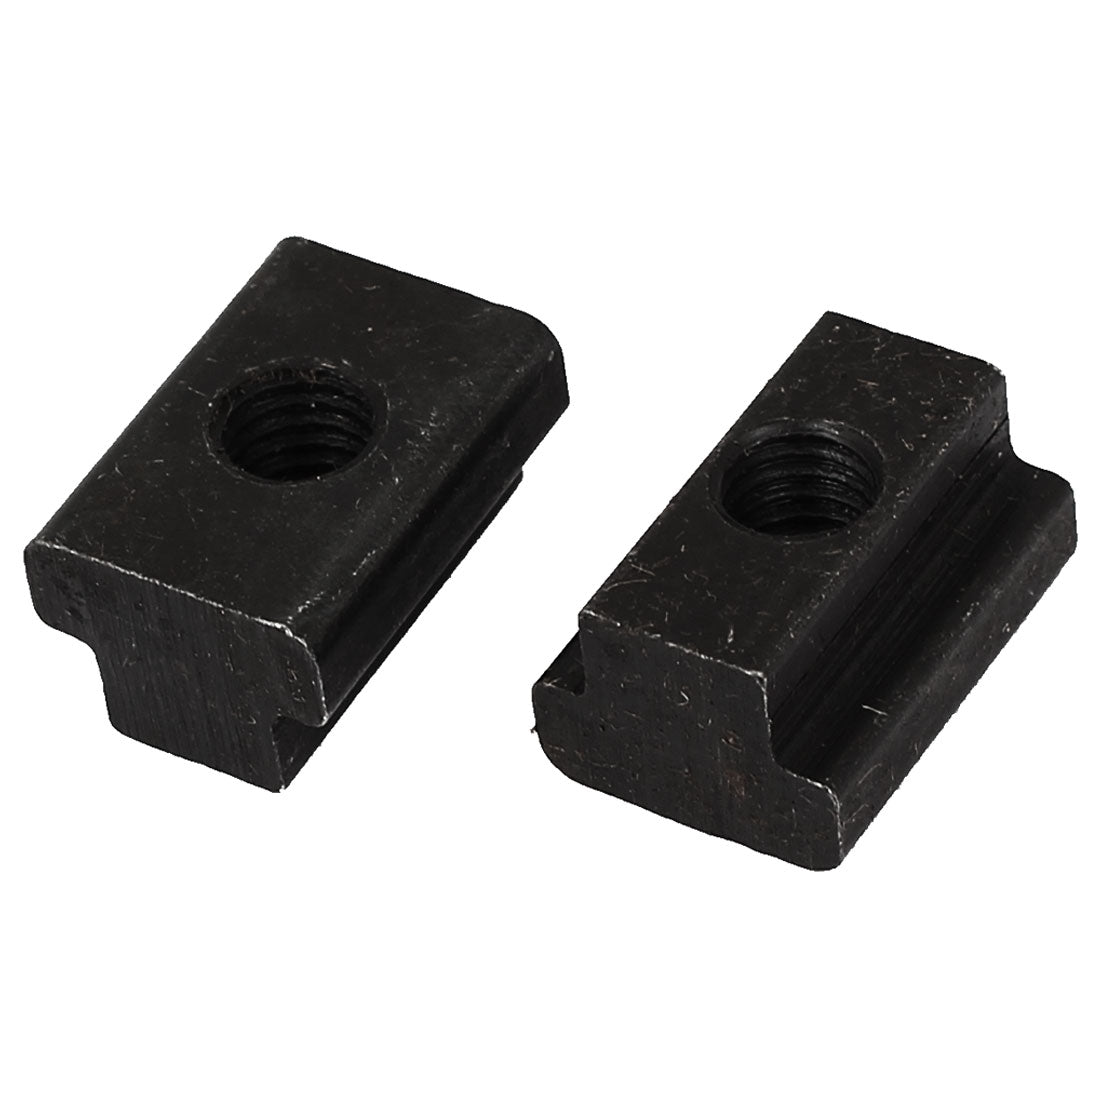 uxcell Uxcell 22mm x 16mm x 12mm M8 Tapped Black Carbon Steel T Slot Nuts 2 Pcs